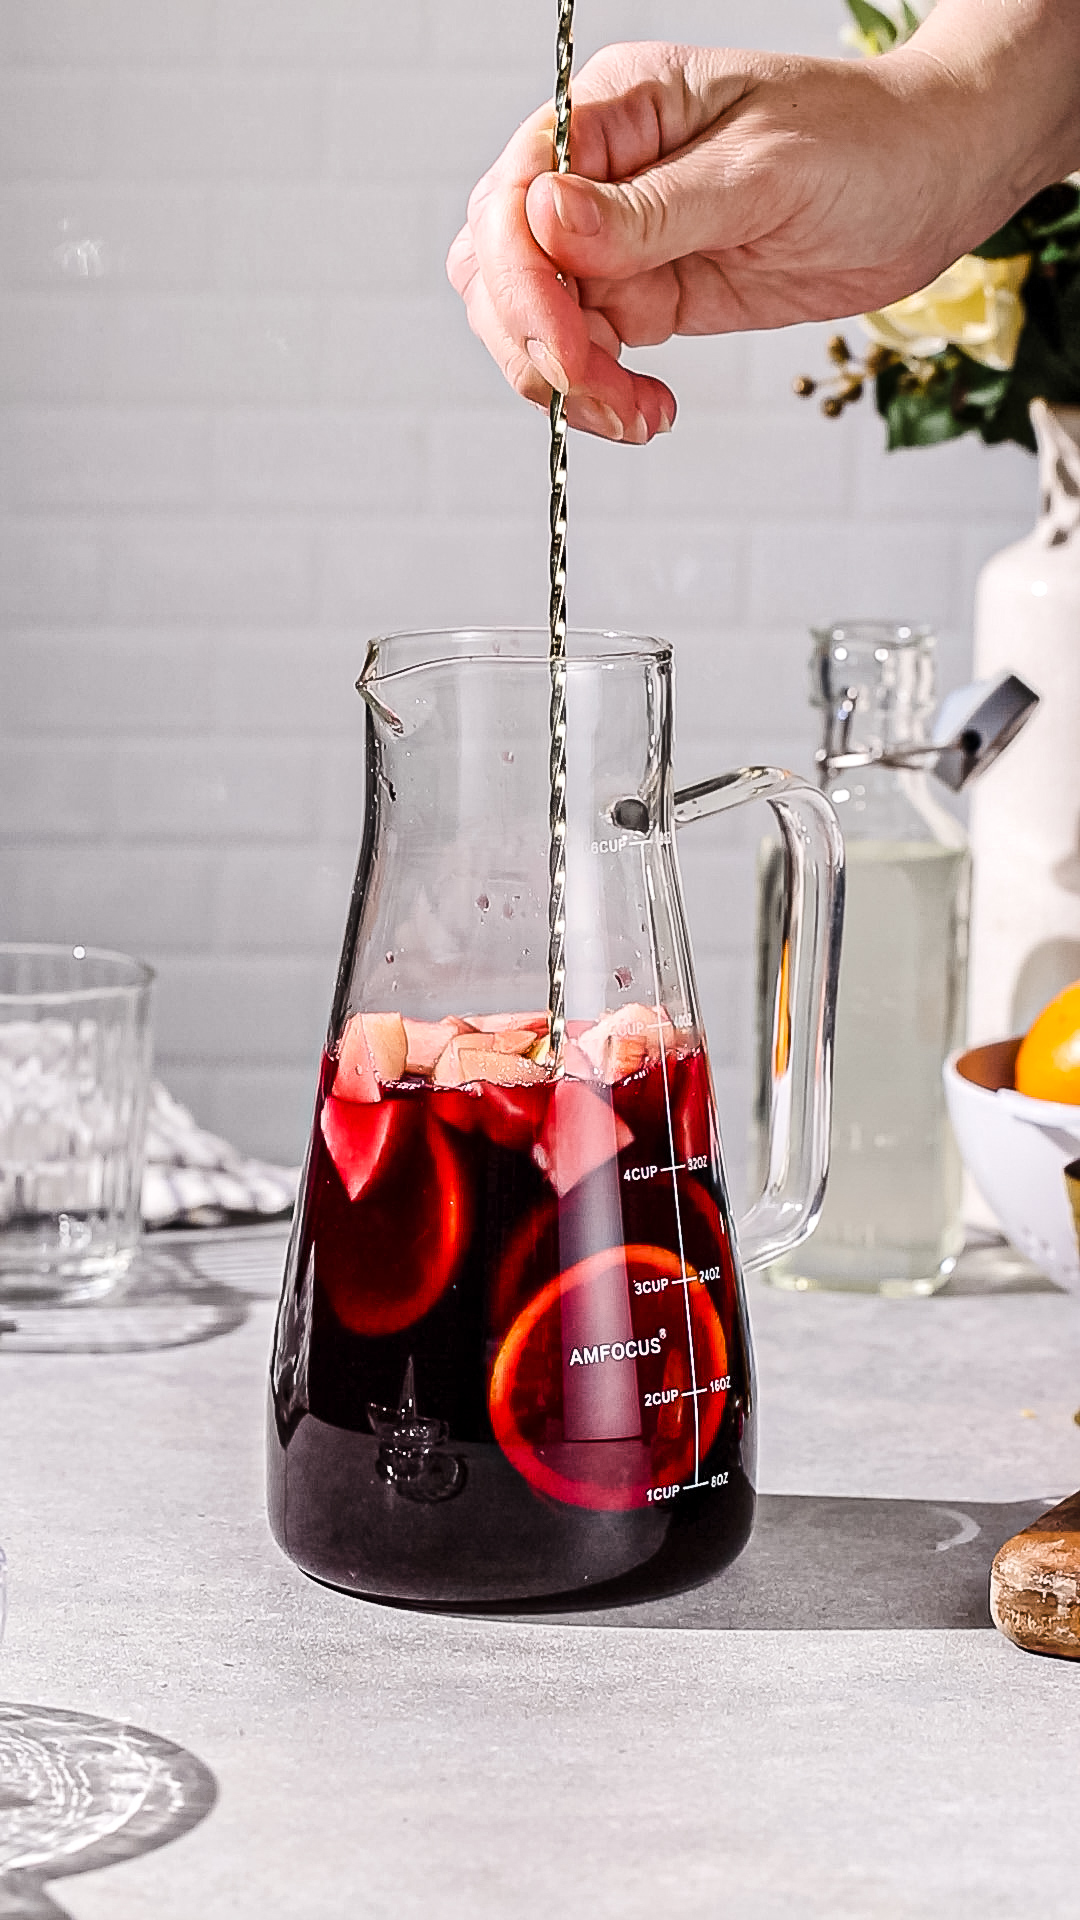 Hand using a long bar spoon to stir a pitcher of non-alcoholic sangria.